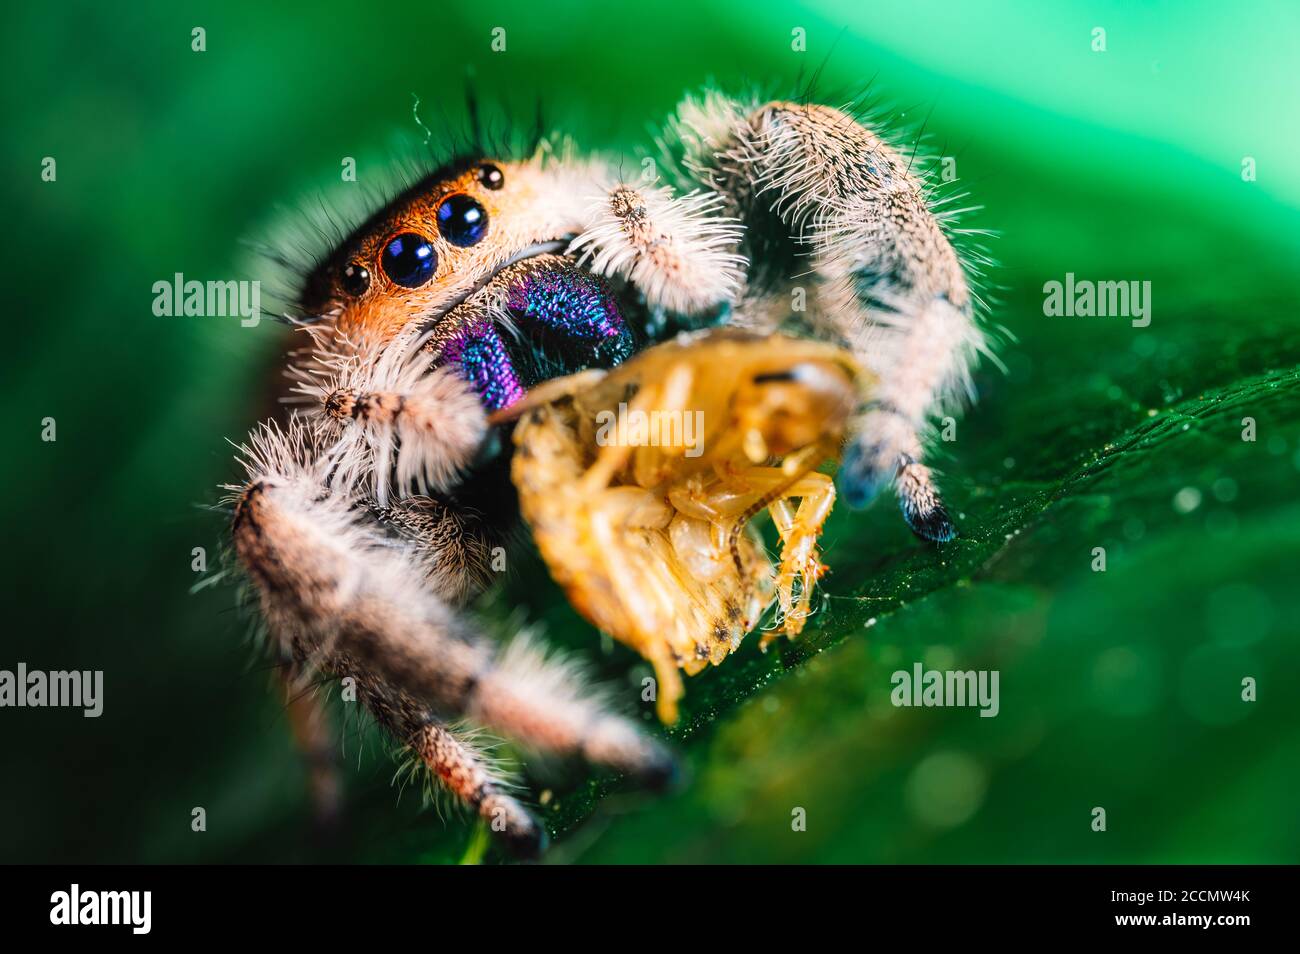 A jumping spider (Phidippus regius) eating its prey cockroach on a green leaf. Macro, big eyes, sharp details. Beautiful big eyes and big fangs. Stock Photo